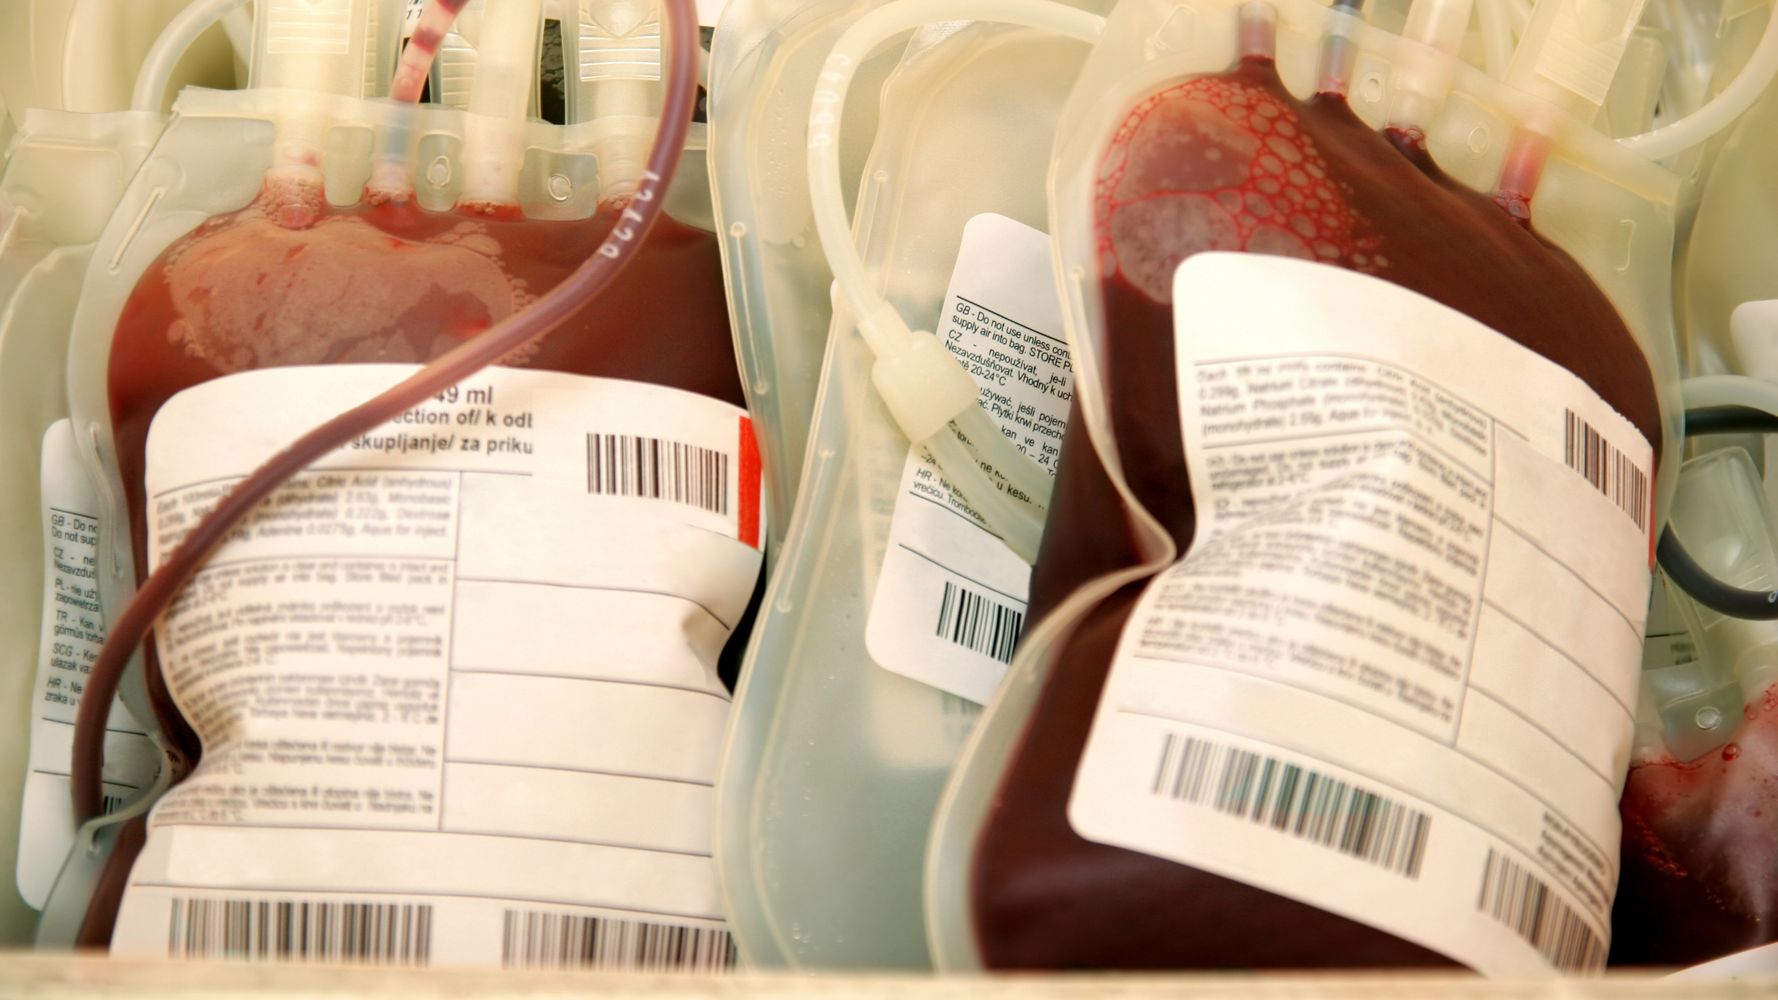 Having Blood Type O Doubles Risk Of Dying From Serious Injury, Research ...